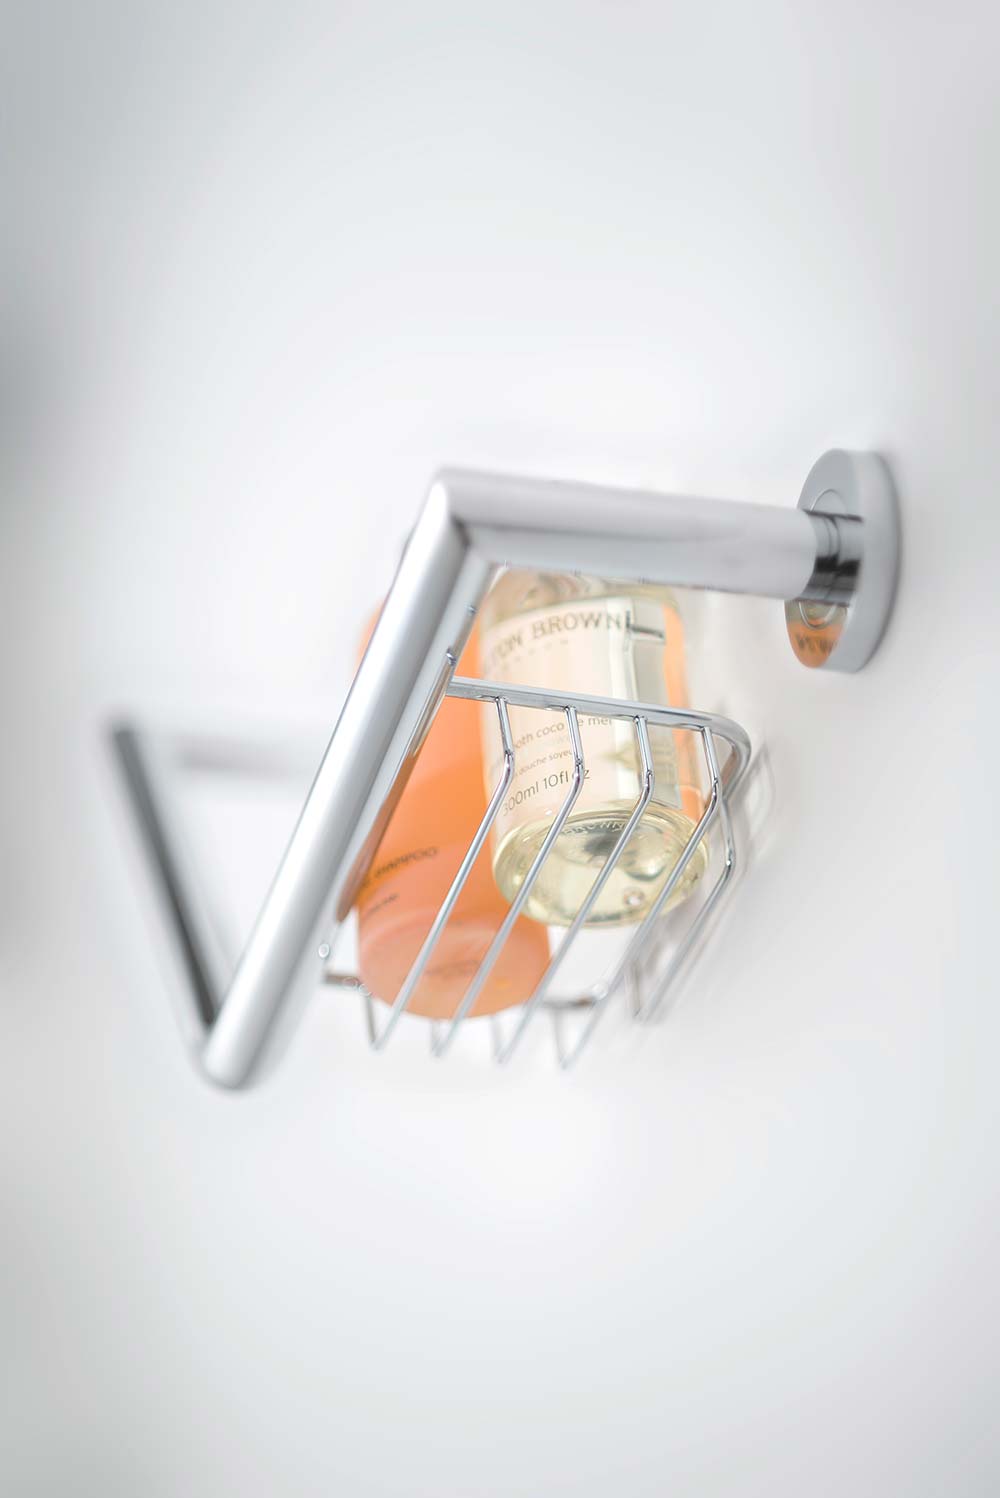 Grab rail with basket and soap bottles on a plain white background